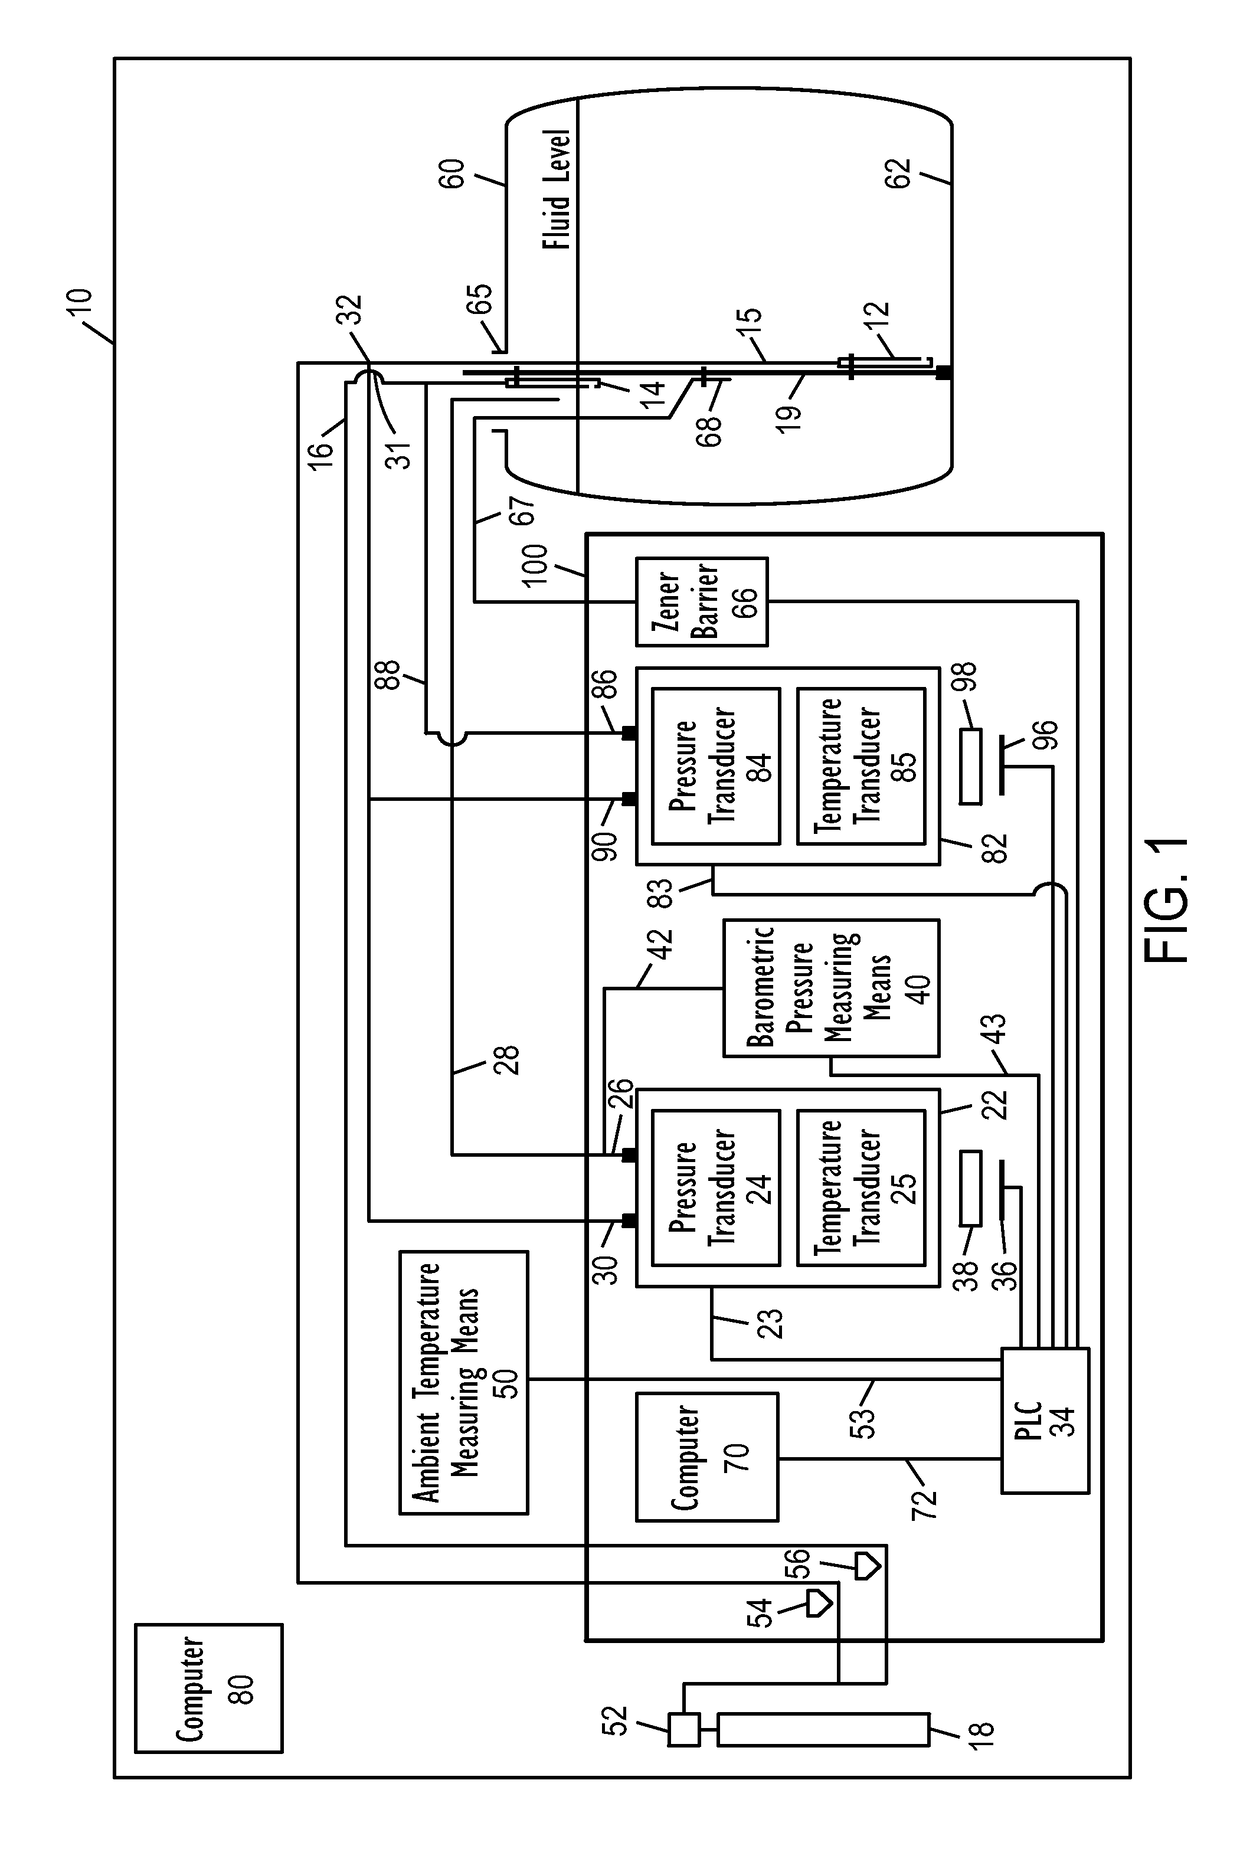 Method and apparatus for leak detection in horizontal cylindrical storage tanks